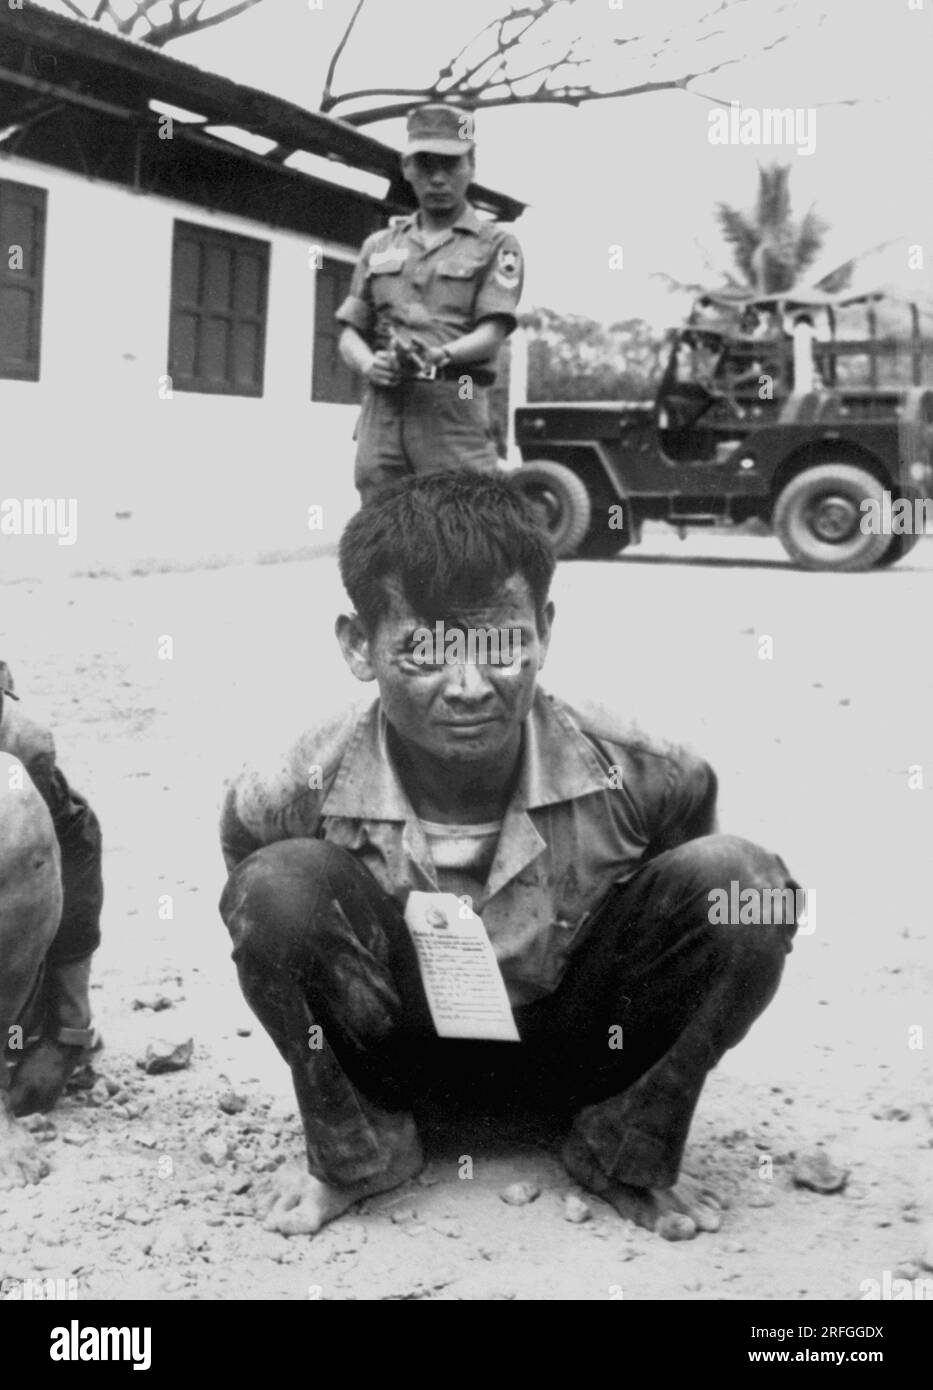 SAIGON, VIETNAM - February 1968 - A youthful Vietcong fighter, heavily guarded, awaits interrogation following capture in the attacks on the capital c Stock Photo